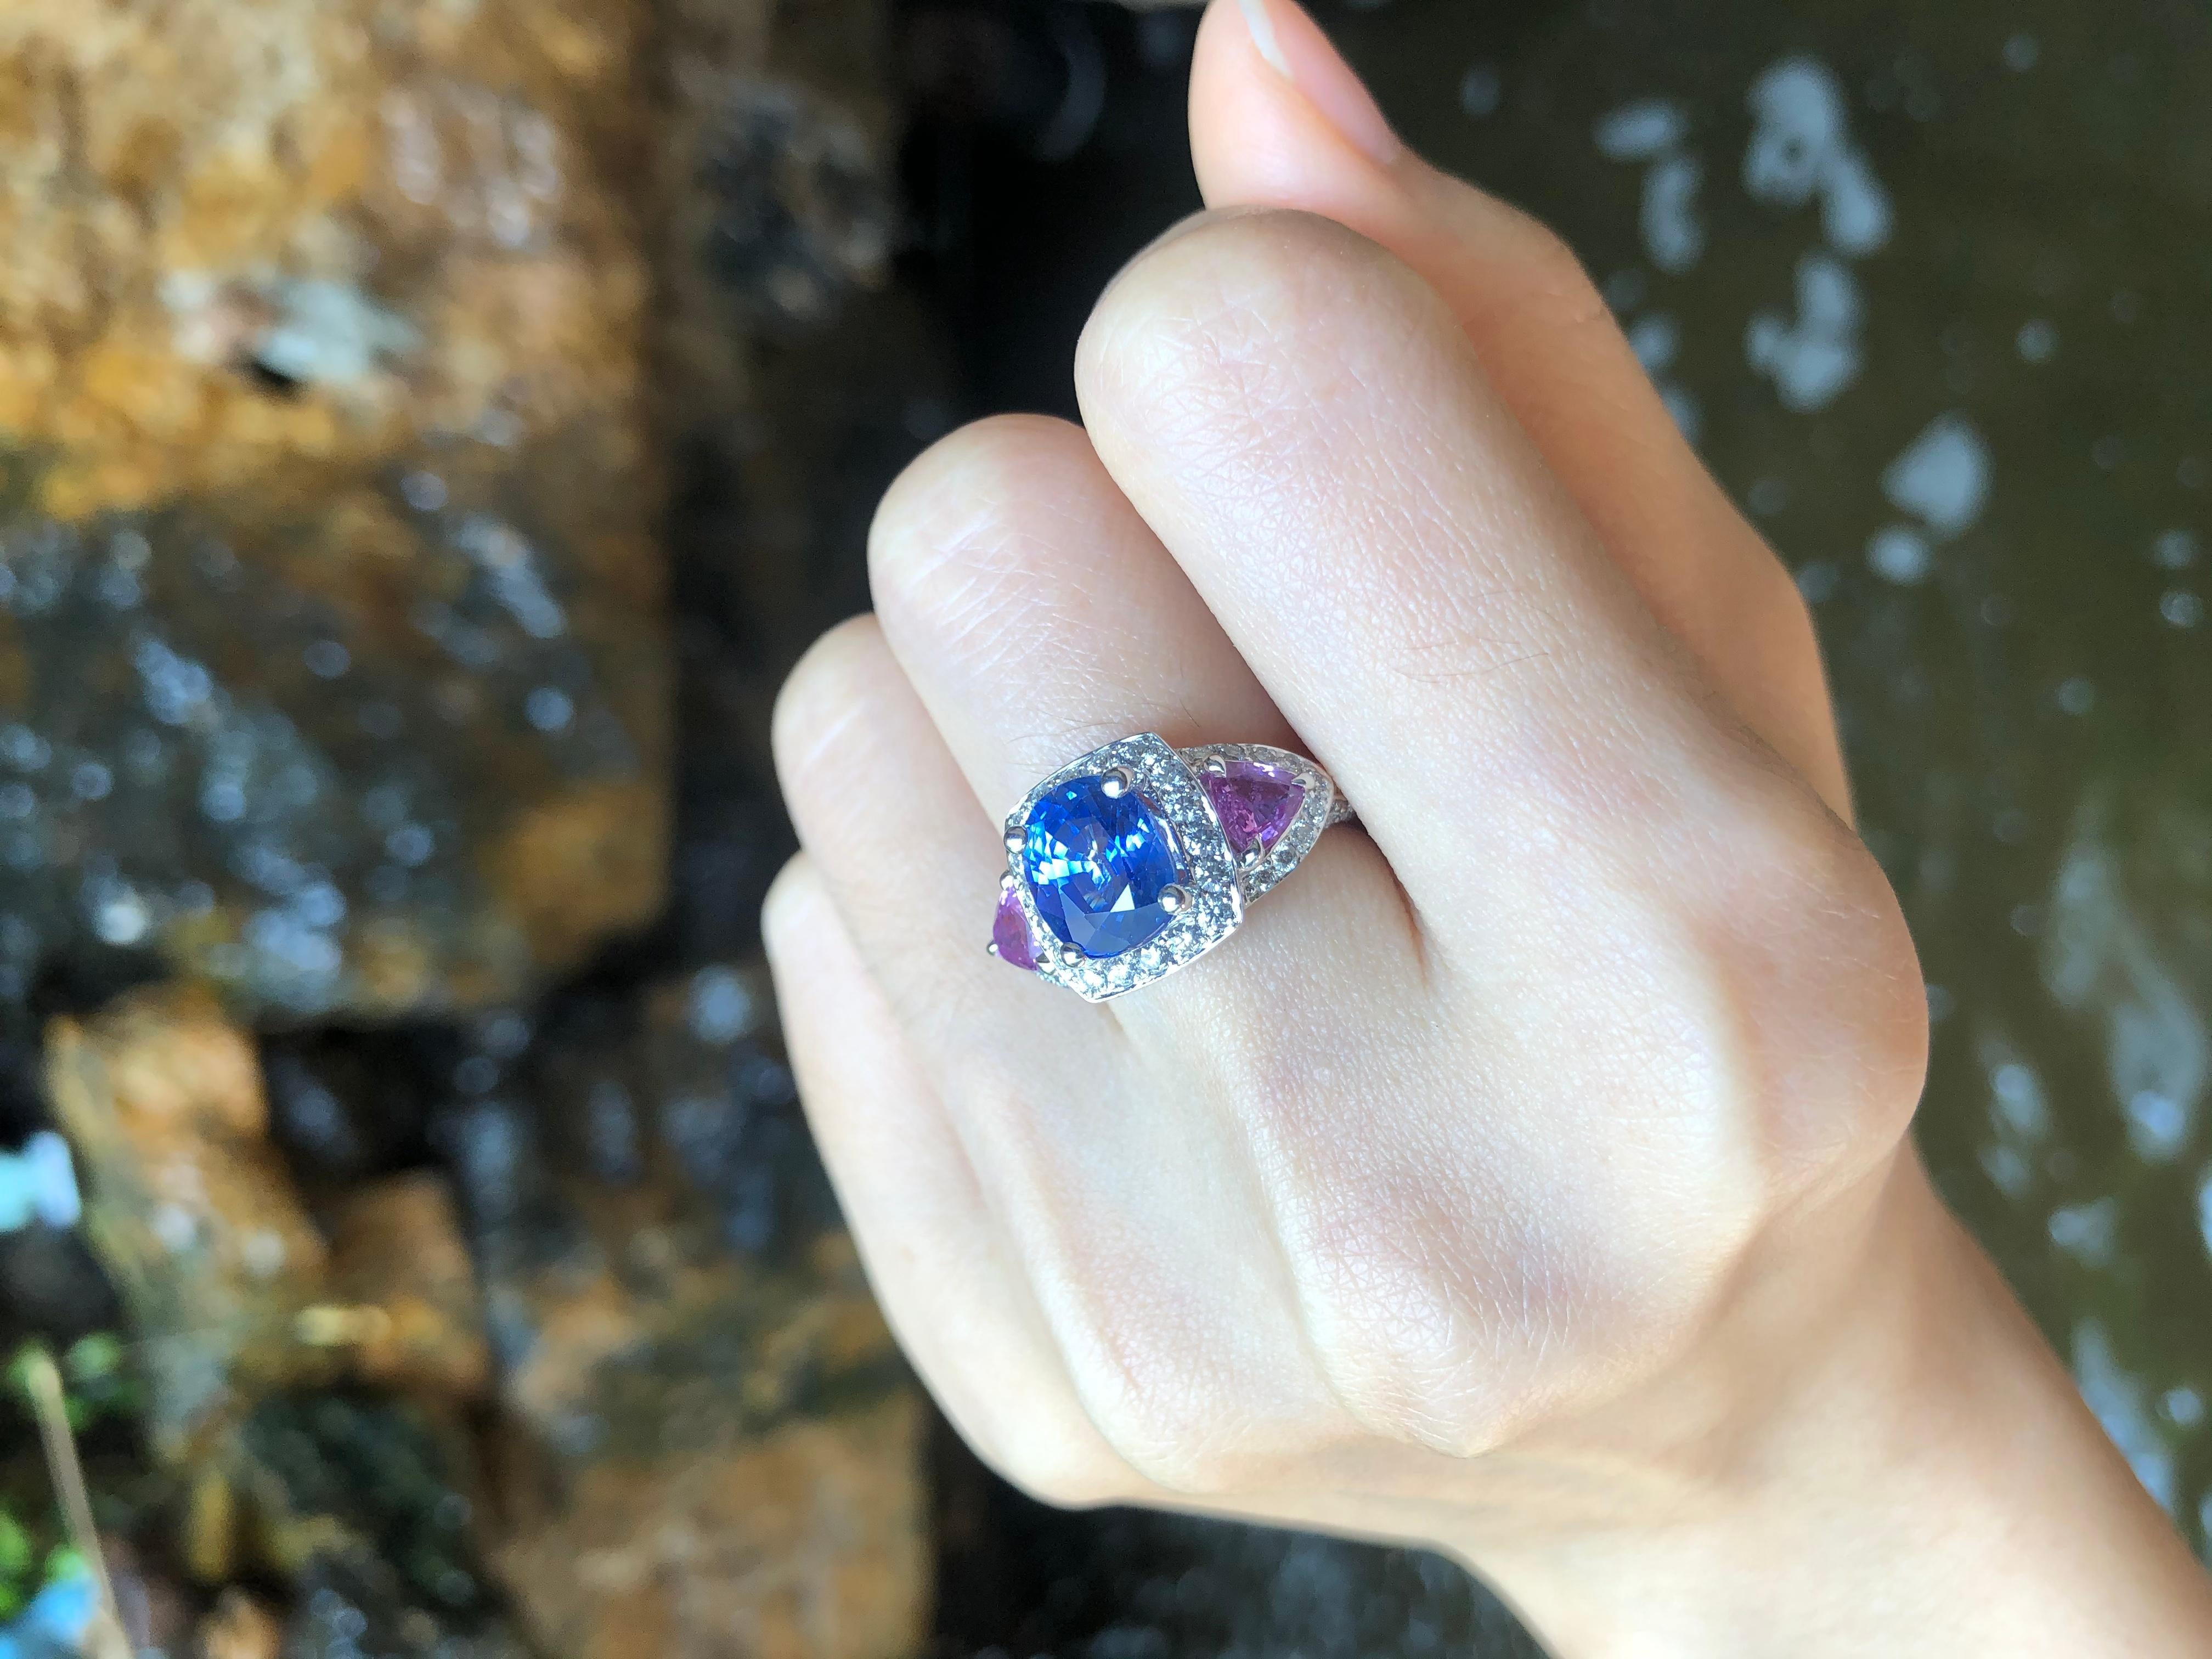 Blue Sapphire 3.59 carats with Pink Sapphire 0.97 carat and Diamond 0.98 carat Ring set in 18 Karat White Gold Settings

Width:  2.1 cm 
Length: 1.3 cm
Ring Size: 51
Total Weight: 6.37 grams

